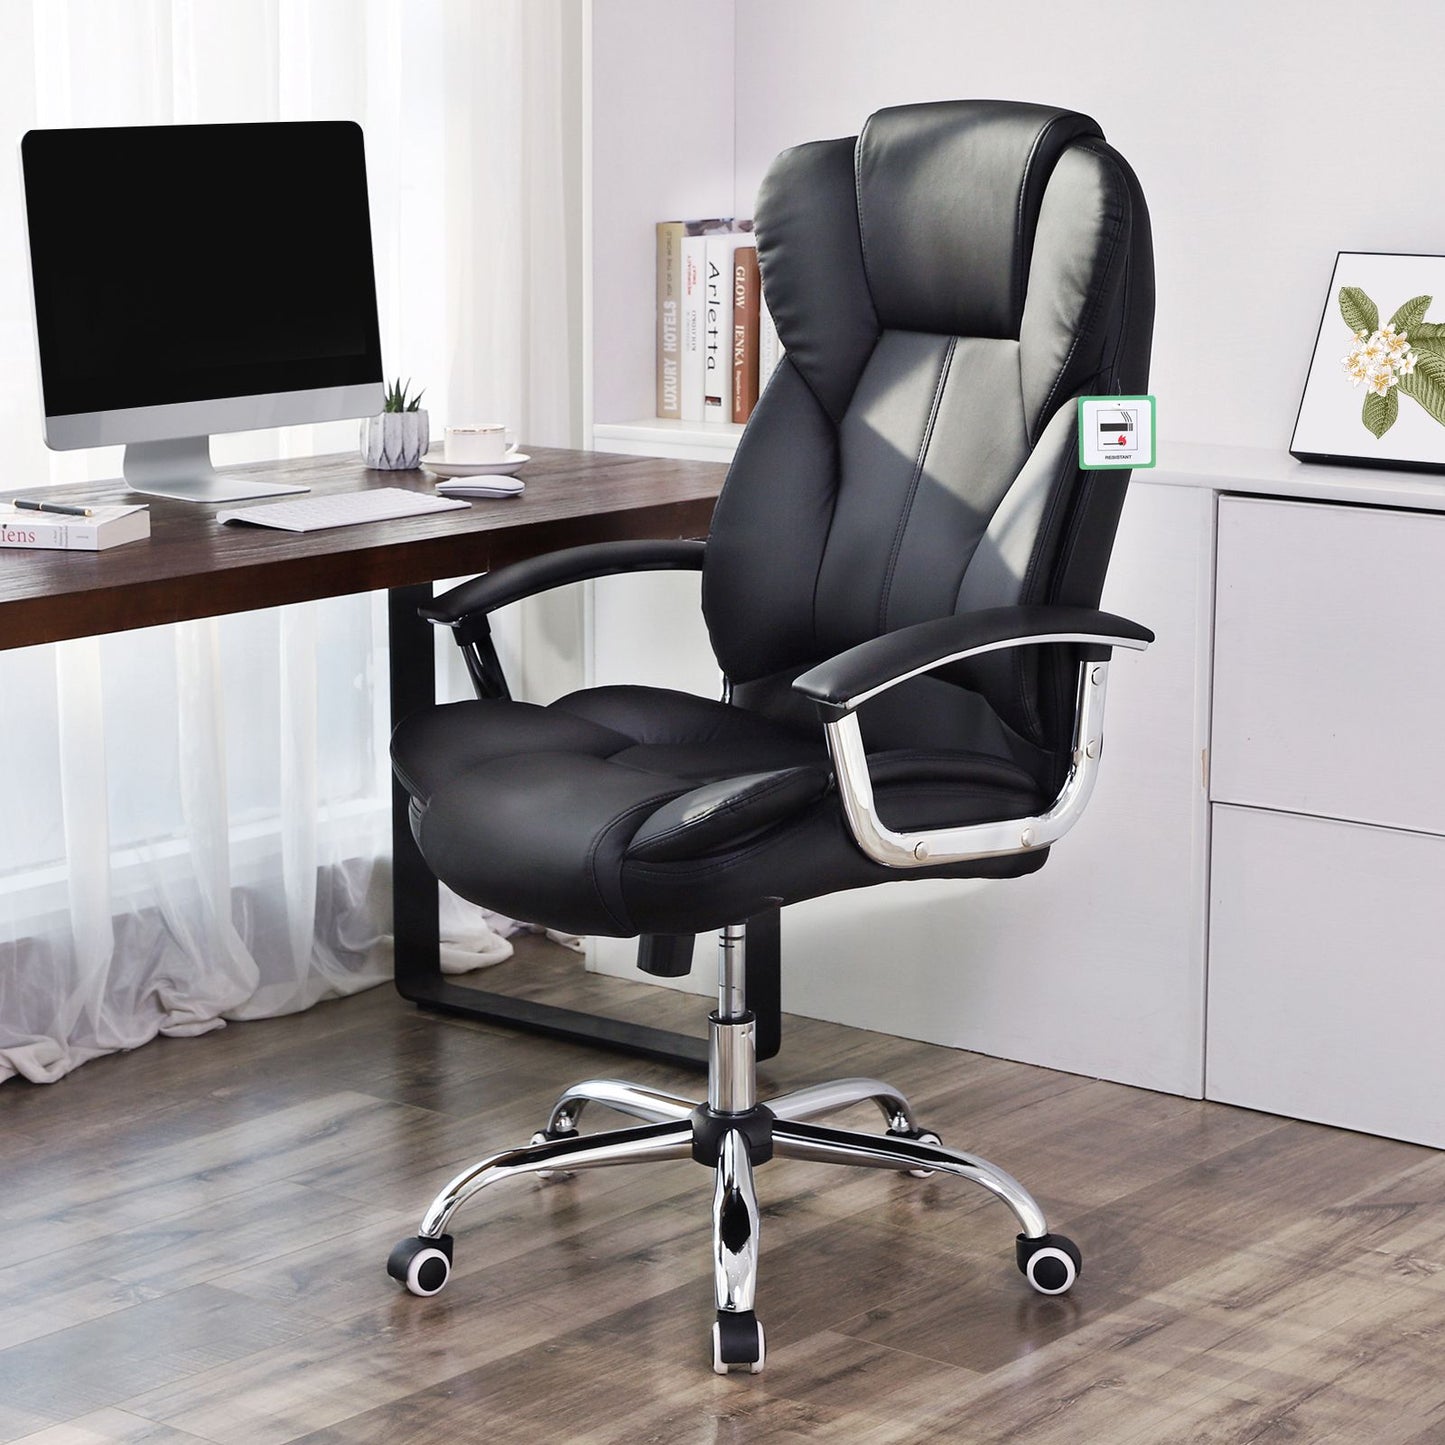 Home office chair - black office chair, gaming office chair. Computer Chair, PU, Black - SONGMICS 1